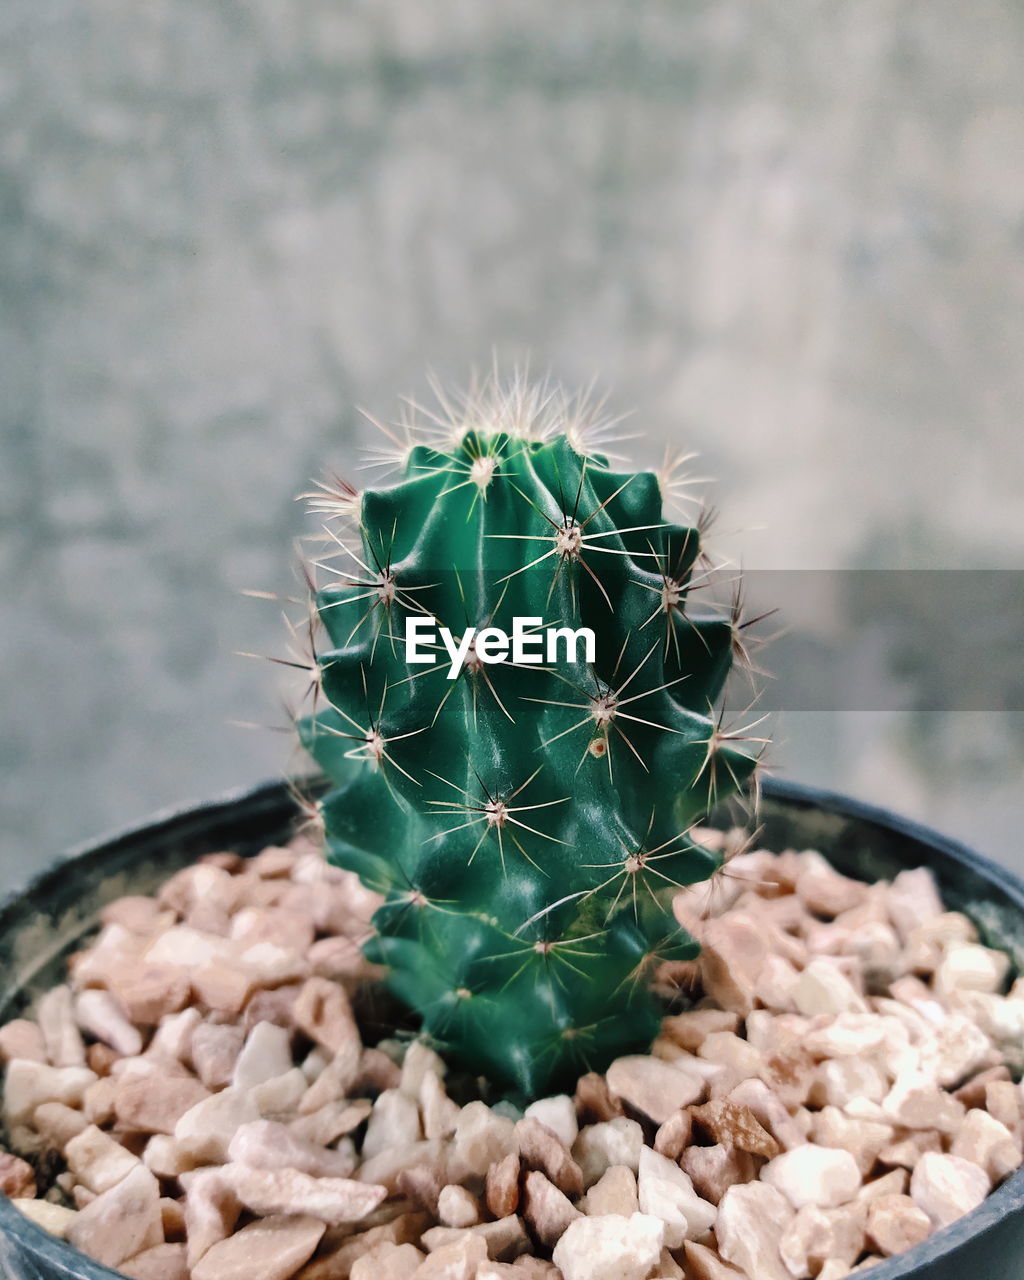 CLOSE-UP OF SUCCULENT PLANT ON POTTED CACTUS